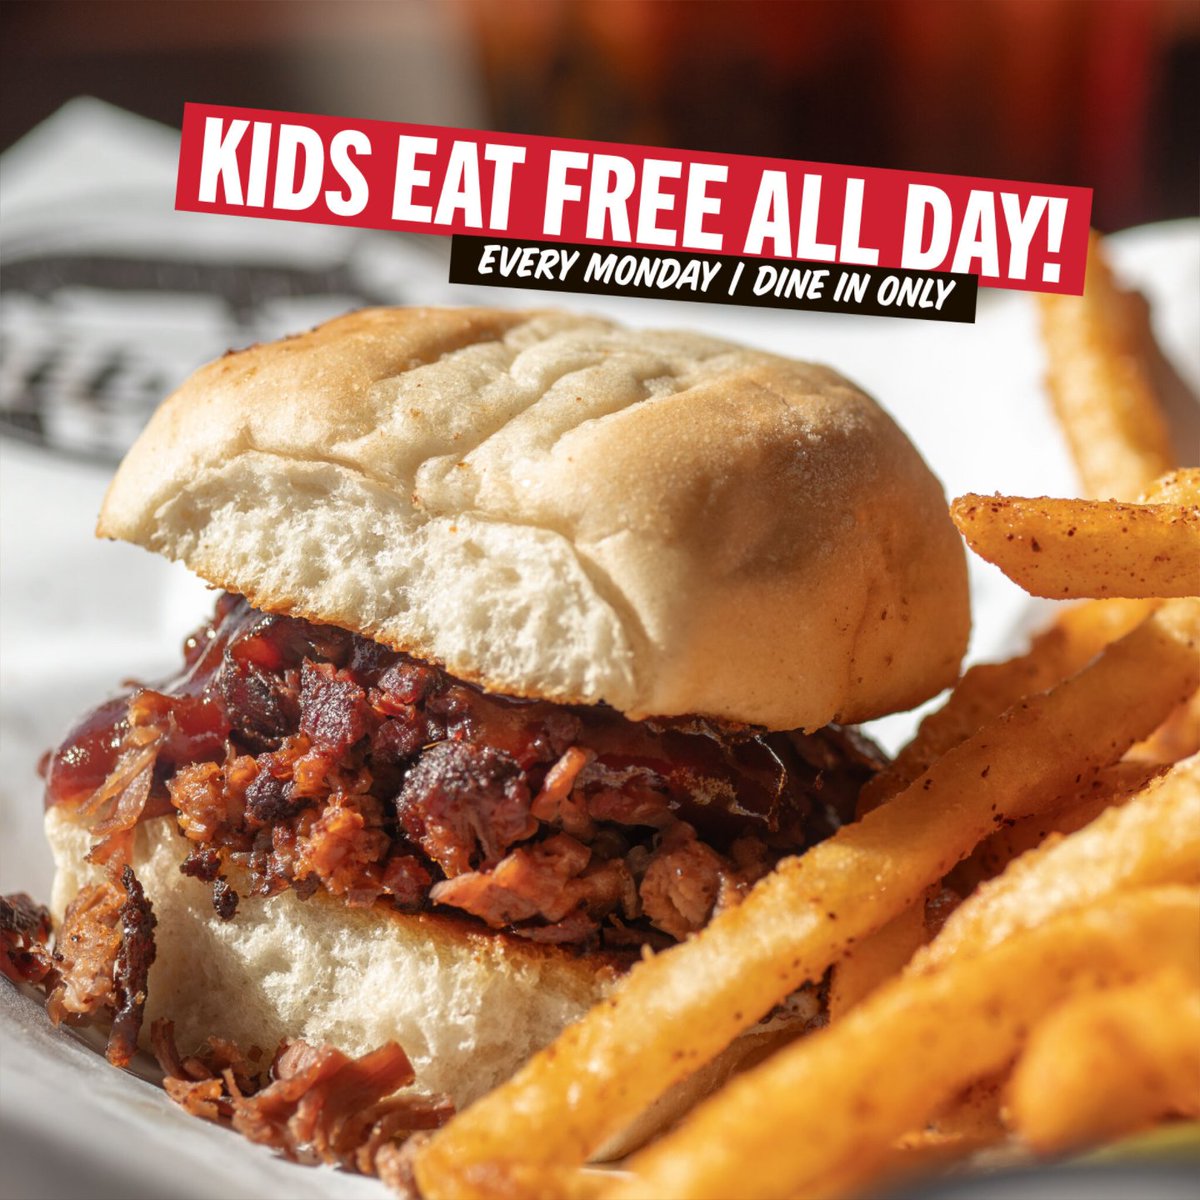 We're kicking off The Big Three-O with Kids Eat Free! All day, every Monday when dining at your local RibCrib, kids eat free with purchase of a qualifying adult meal. Some restrictions may apply.